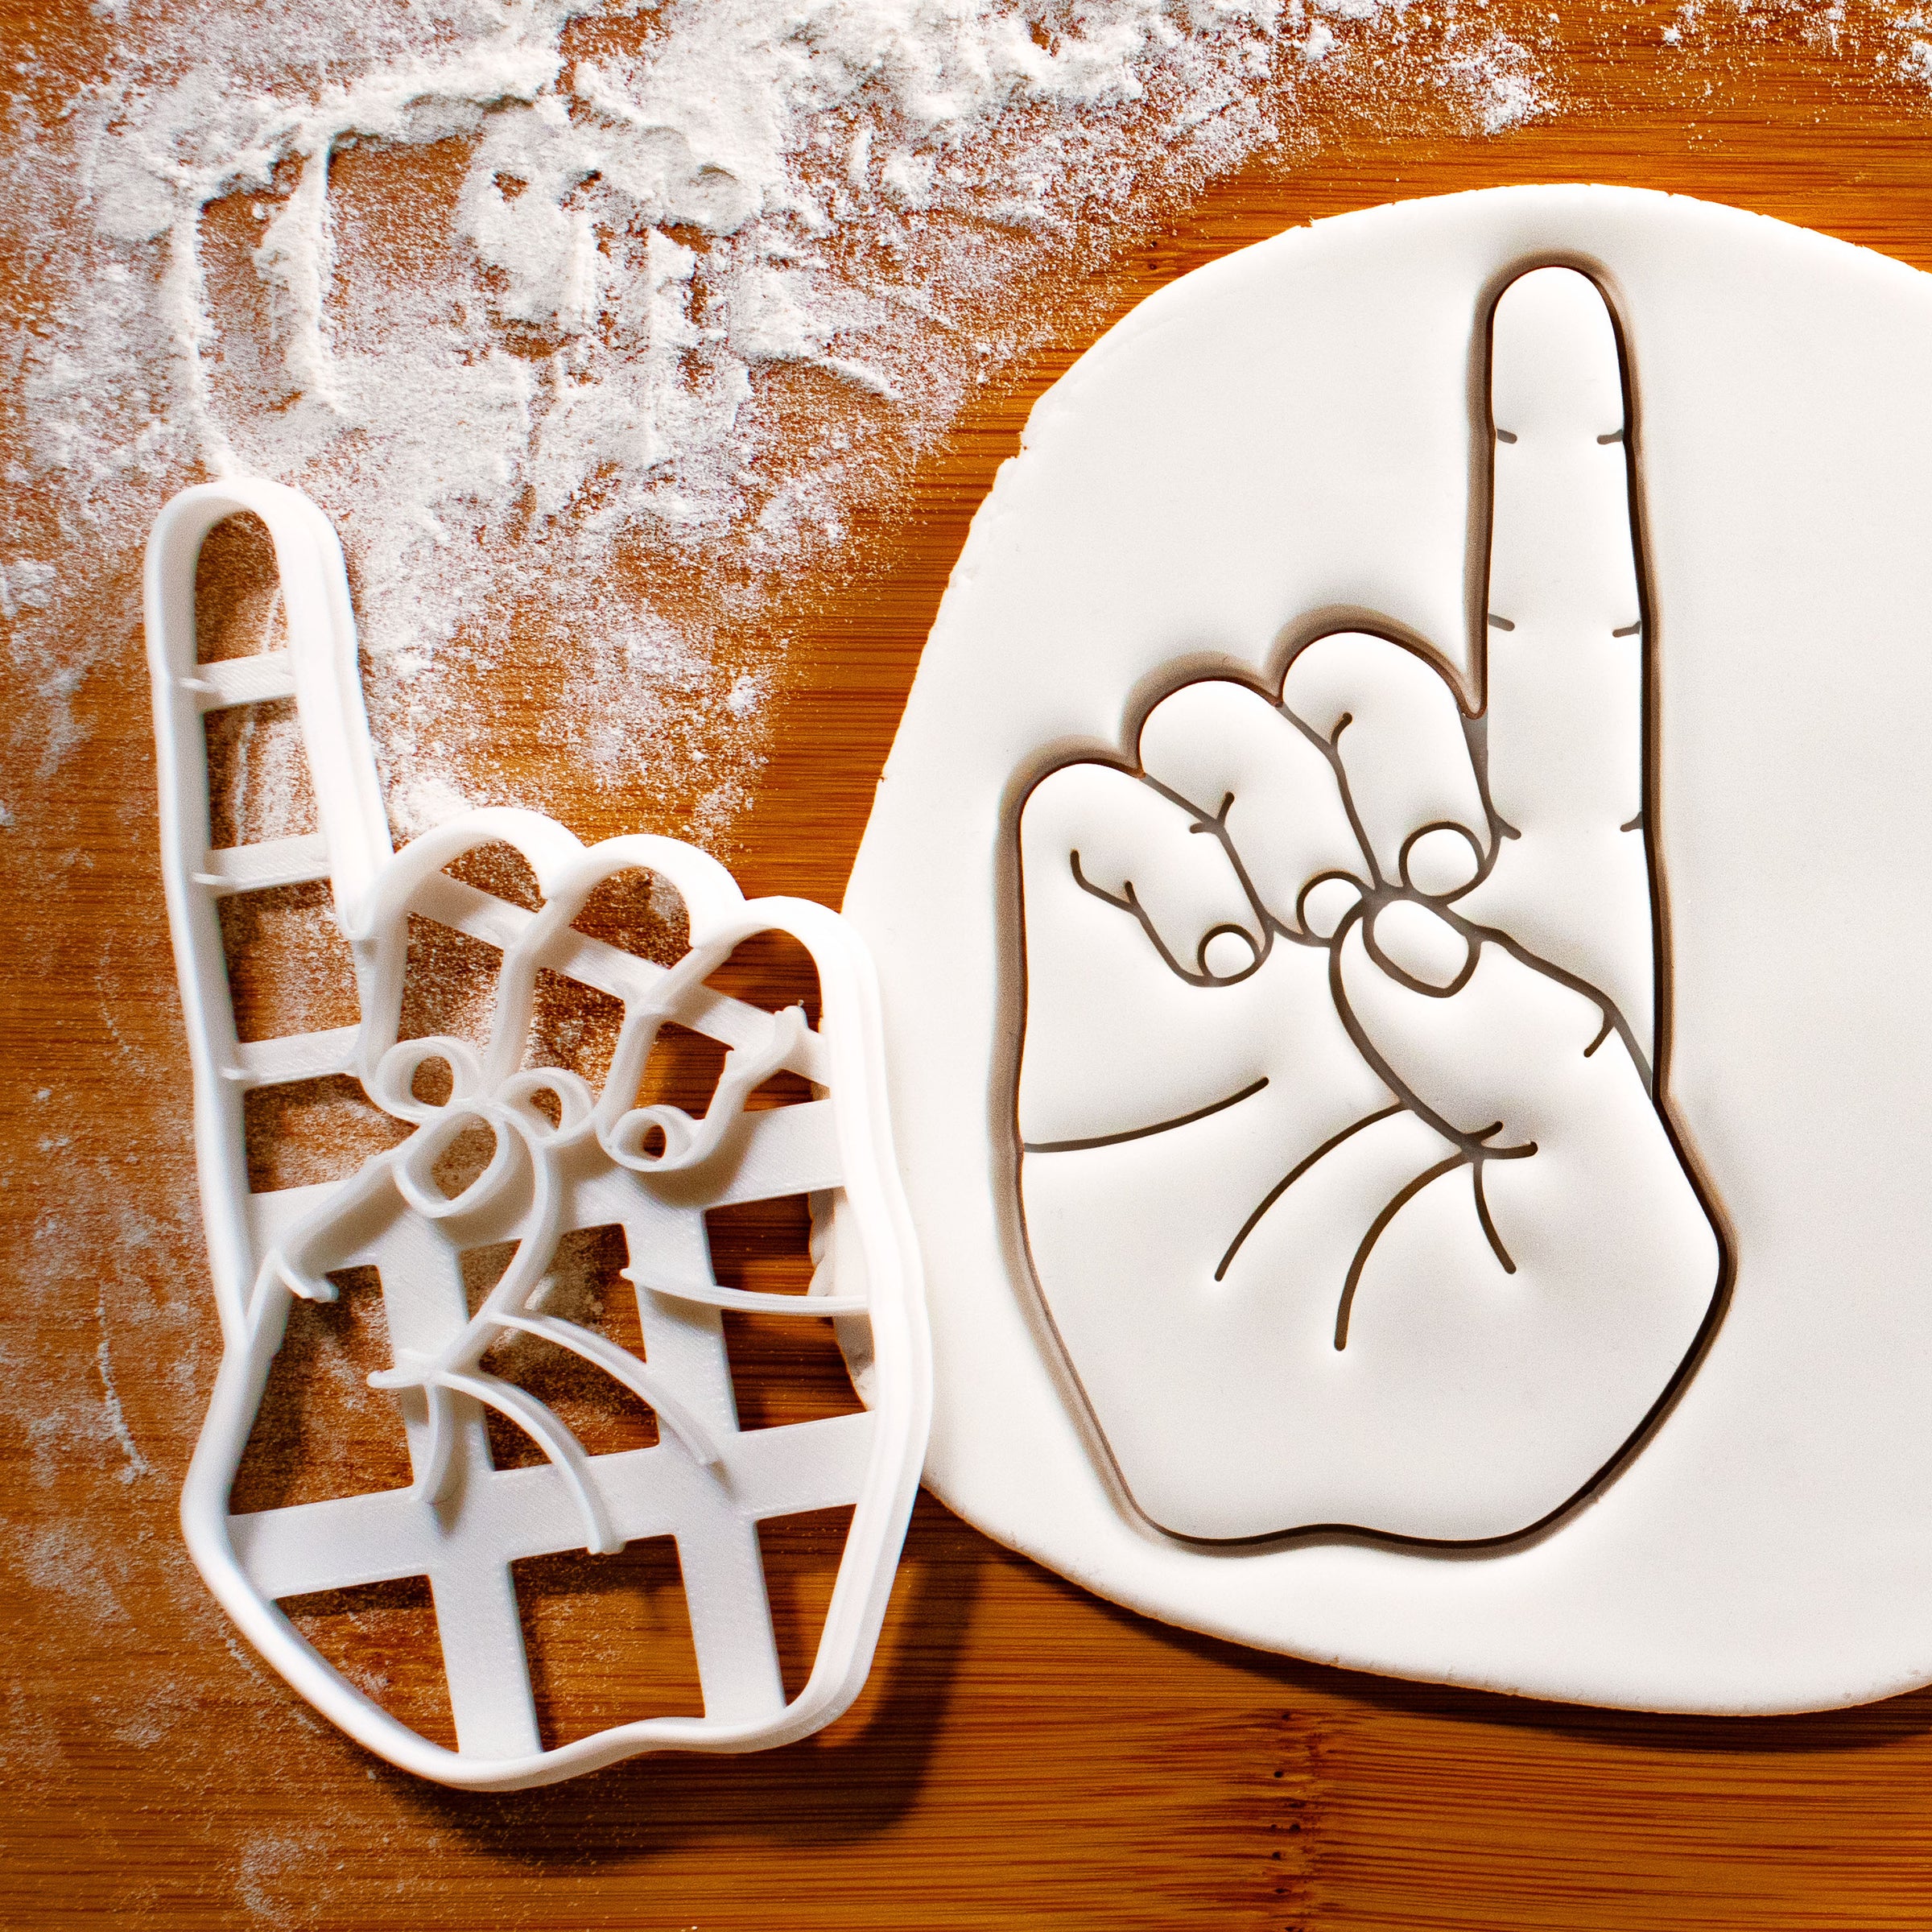 American Sign Language Letter D Cookie Cutter